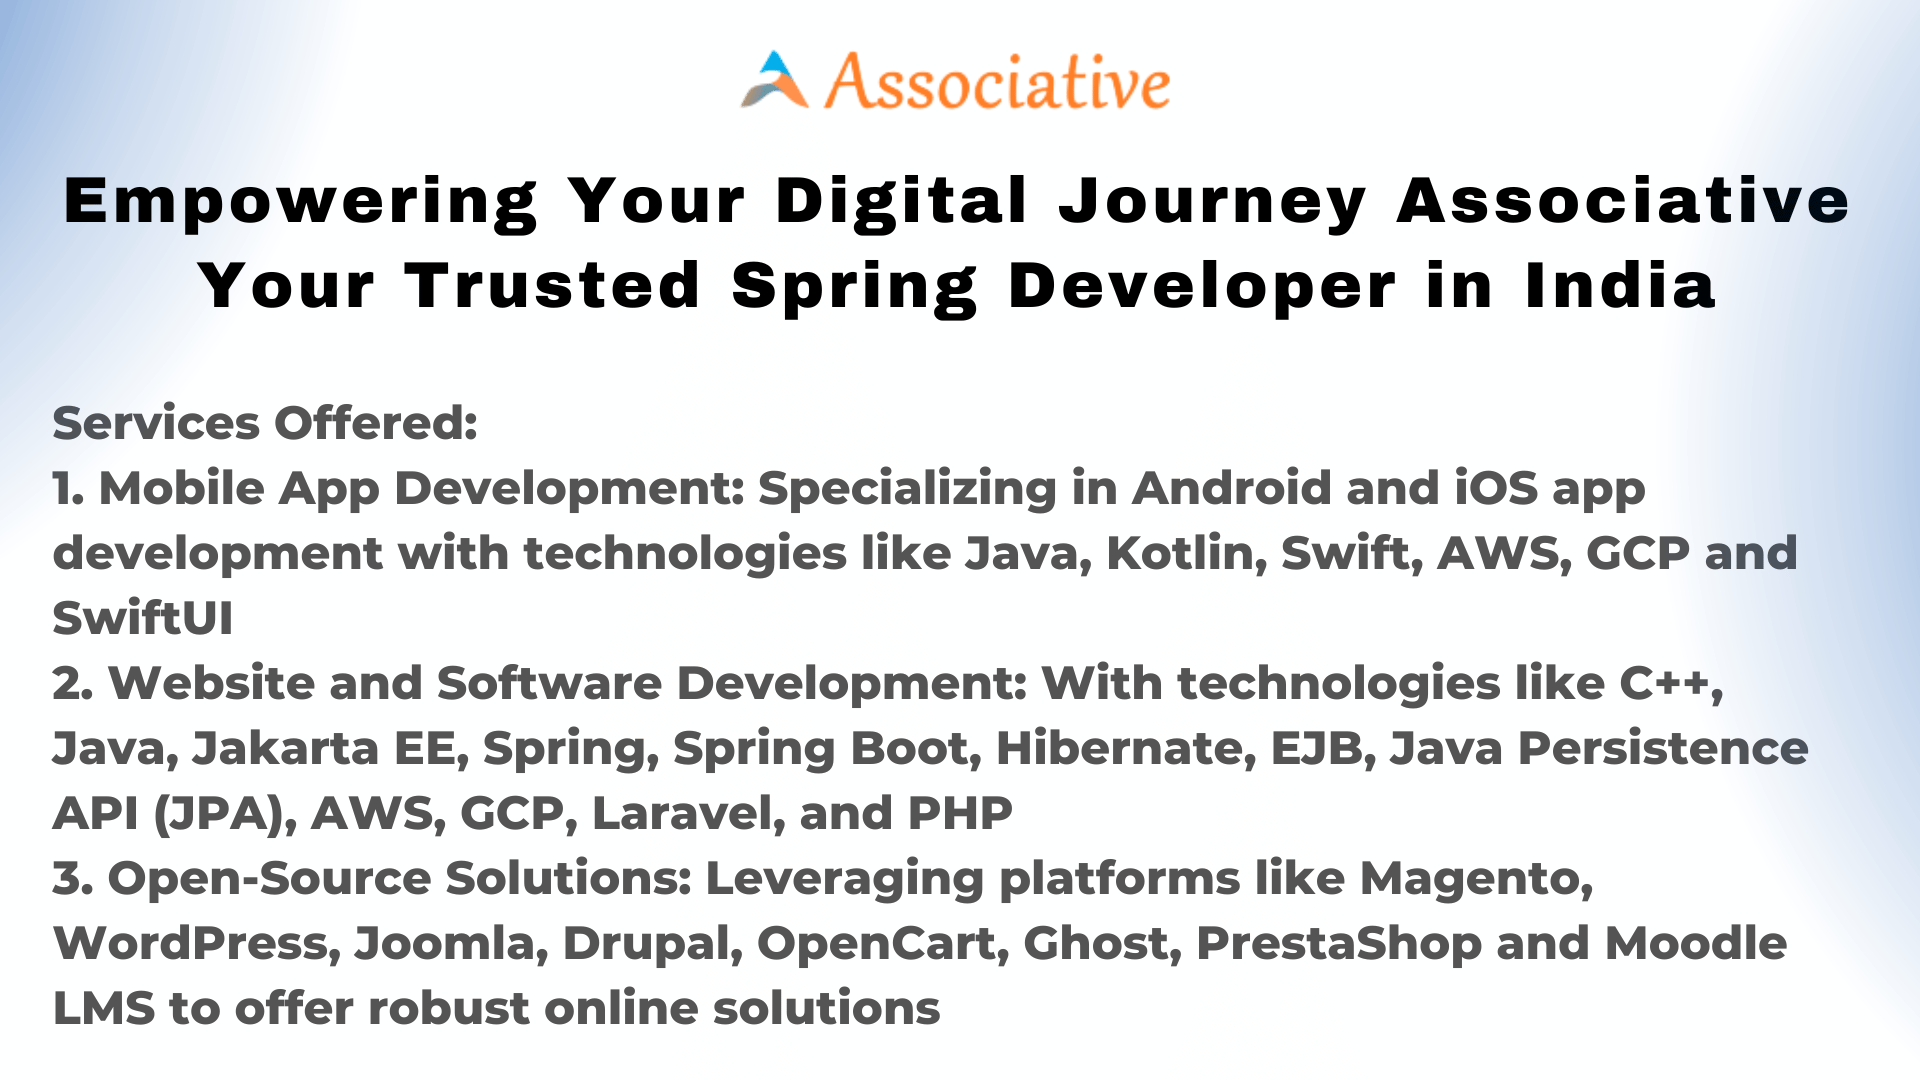 Empowering Your Digital Journey Associative Your Trusted Spring Developer in India